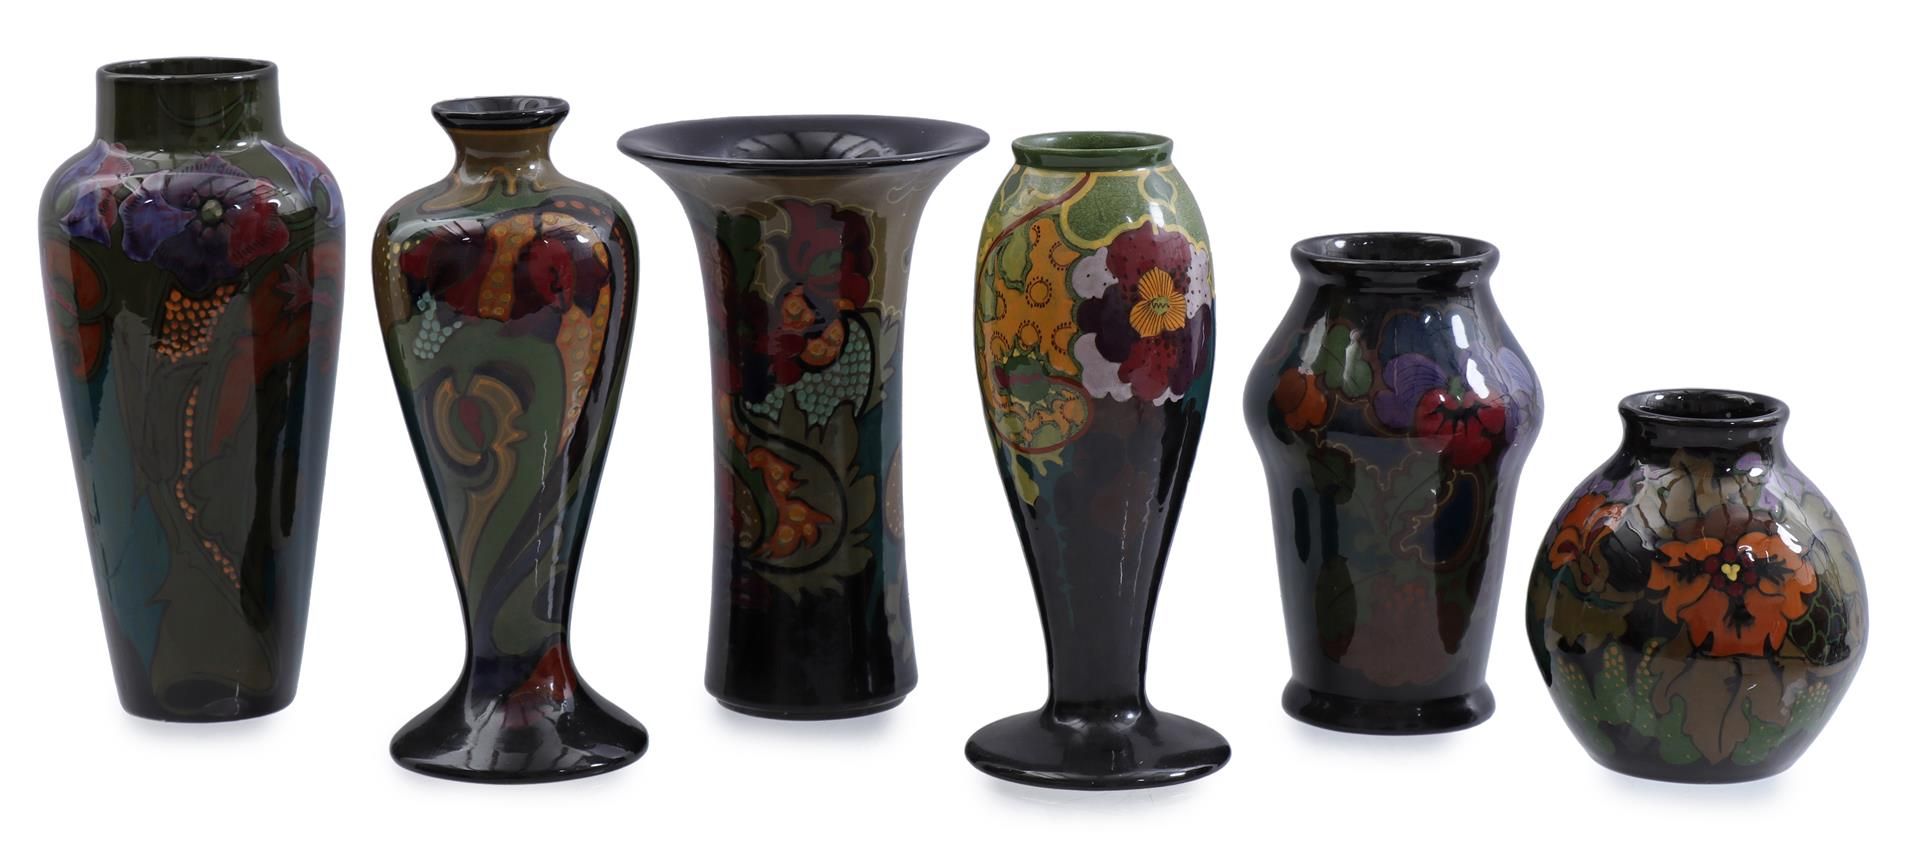 6 various pottery vases